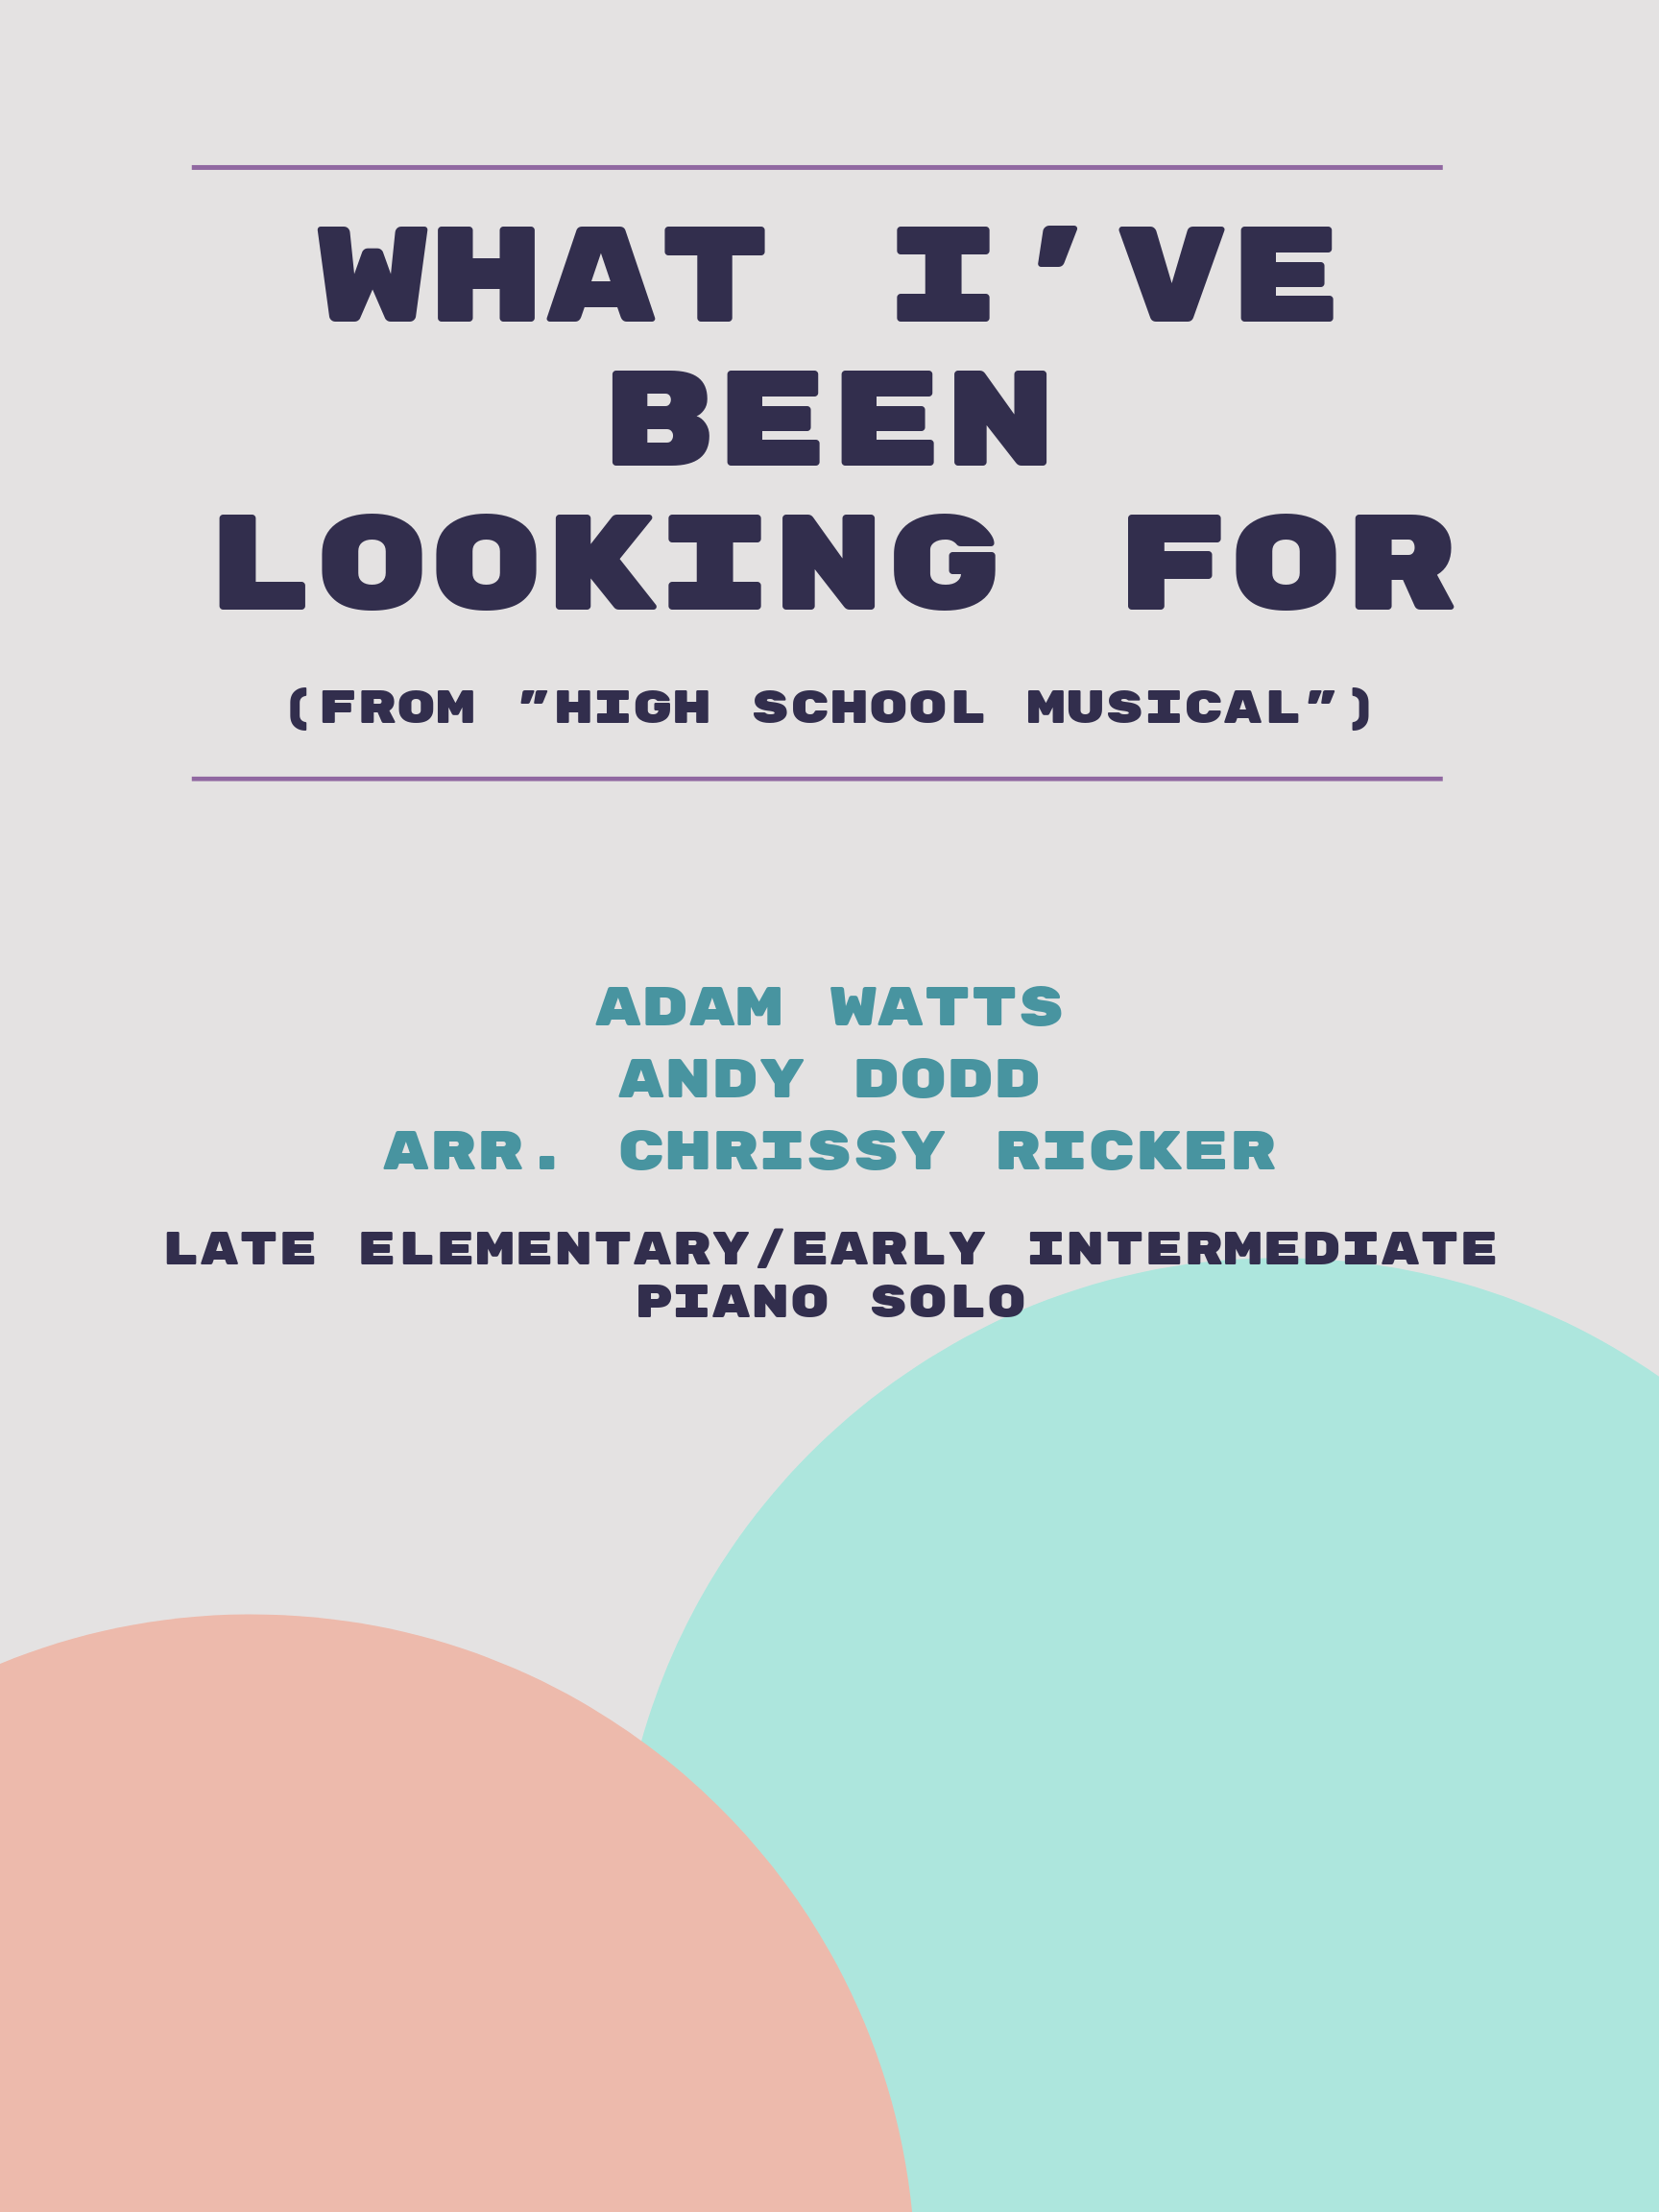 What I've Been Looking For by Adam Watts, Andy Dodd